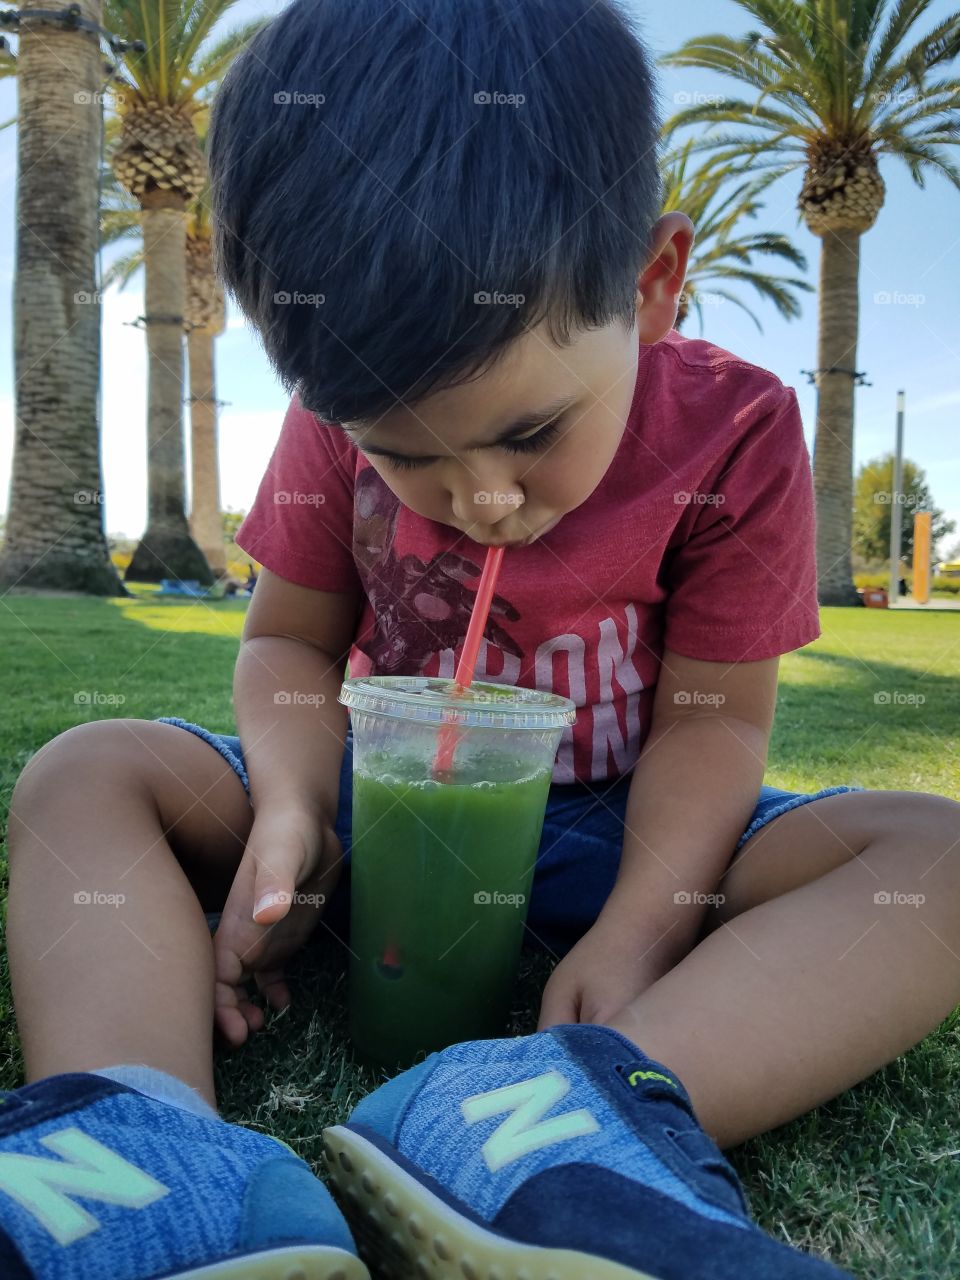 drinking green juice at the park